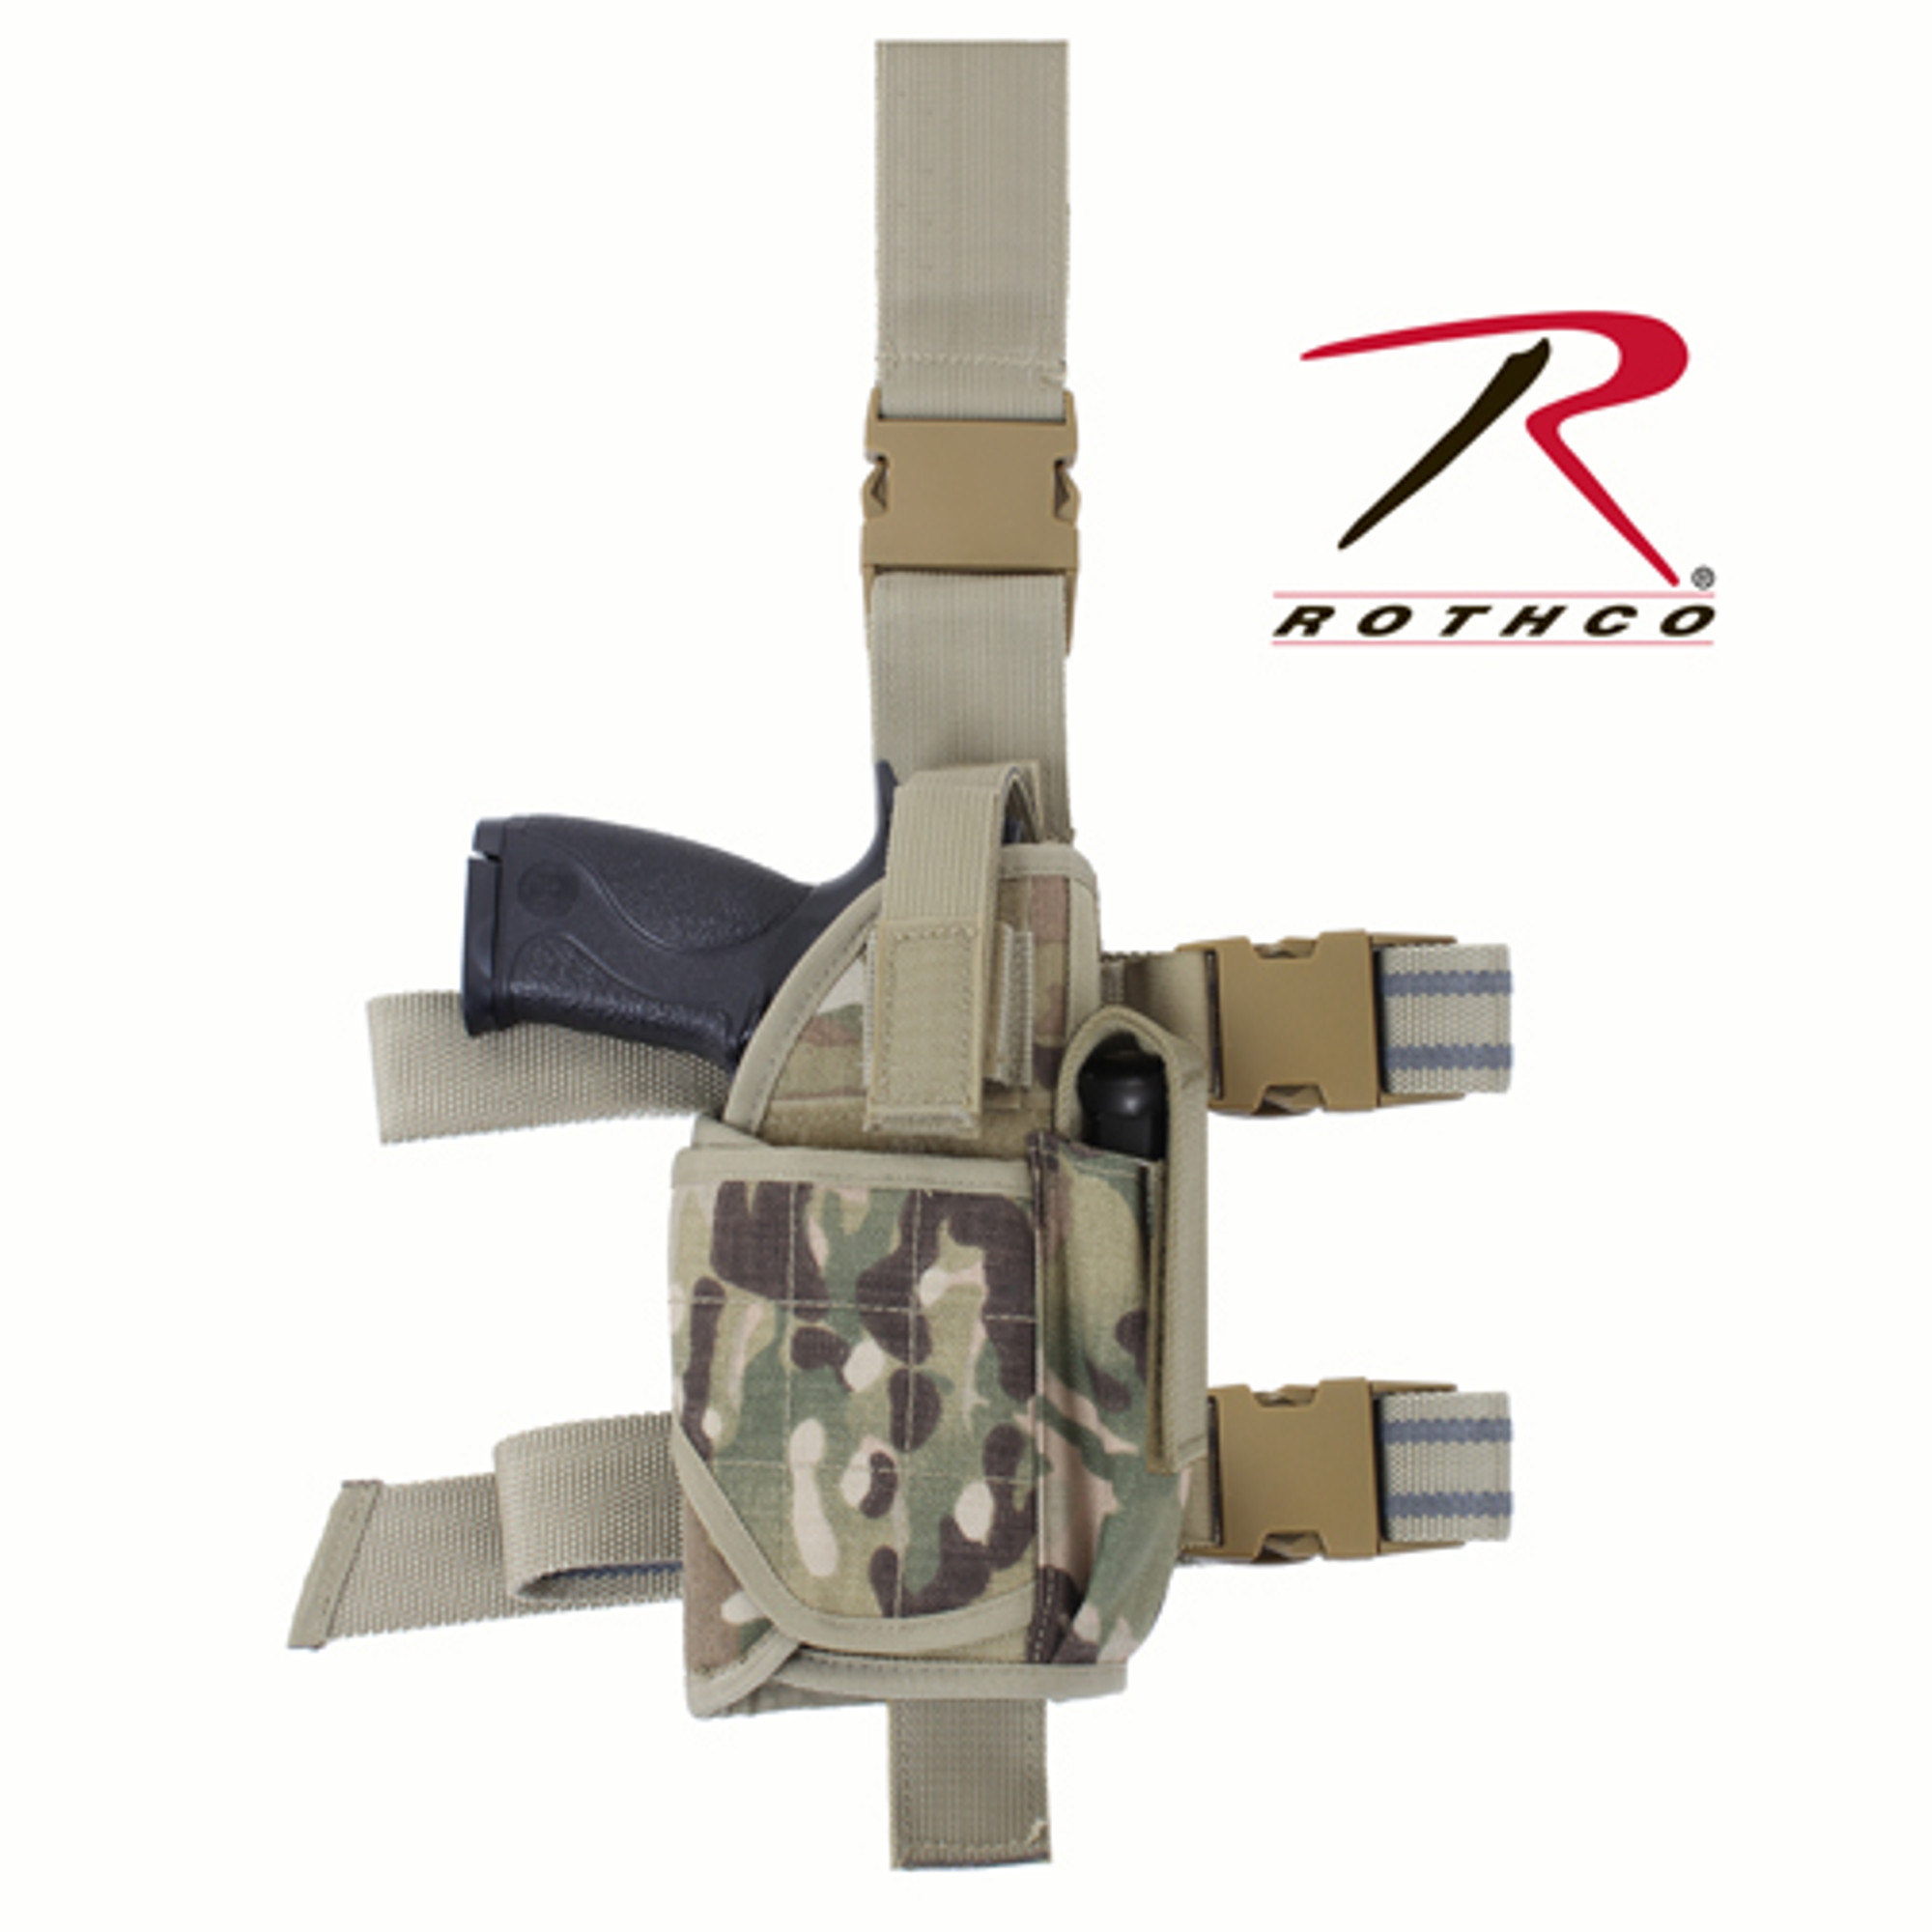 Rothco Deluxe Adjustable Universal Drop Leg Tactical Holster - Multicam